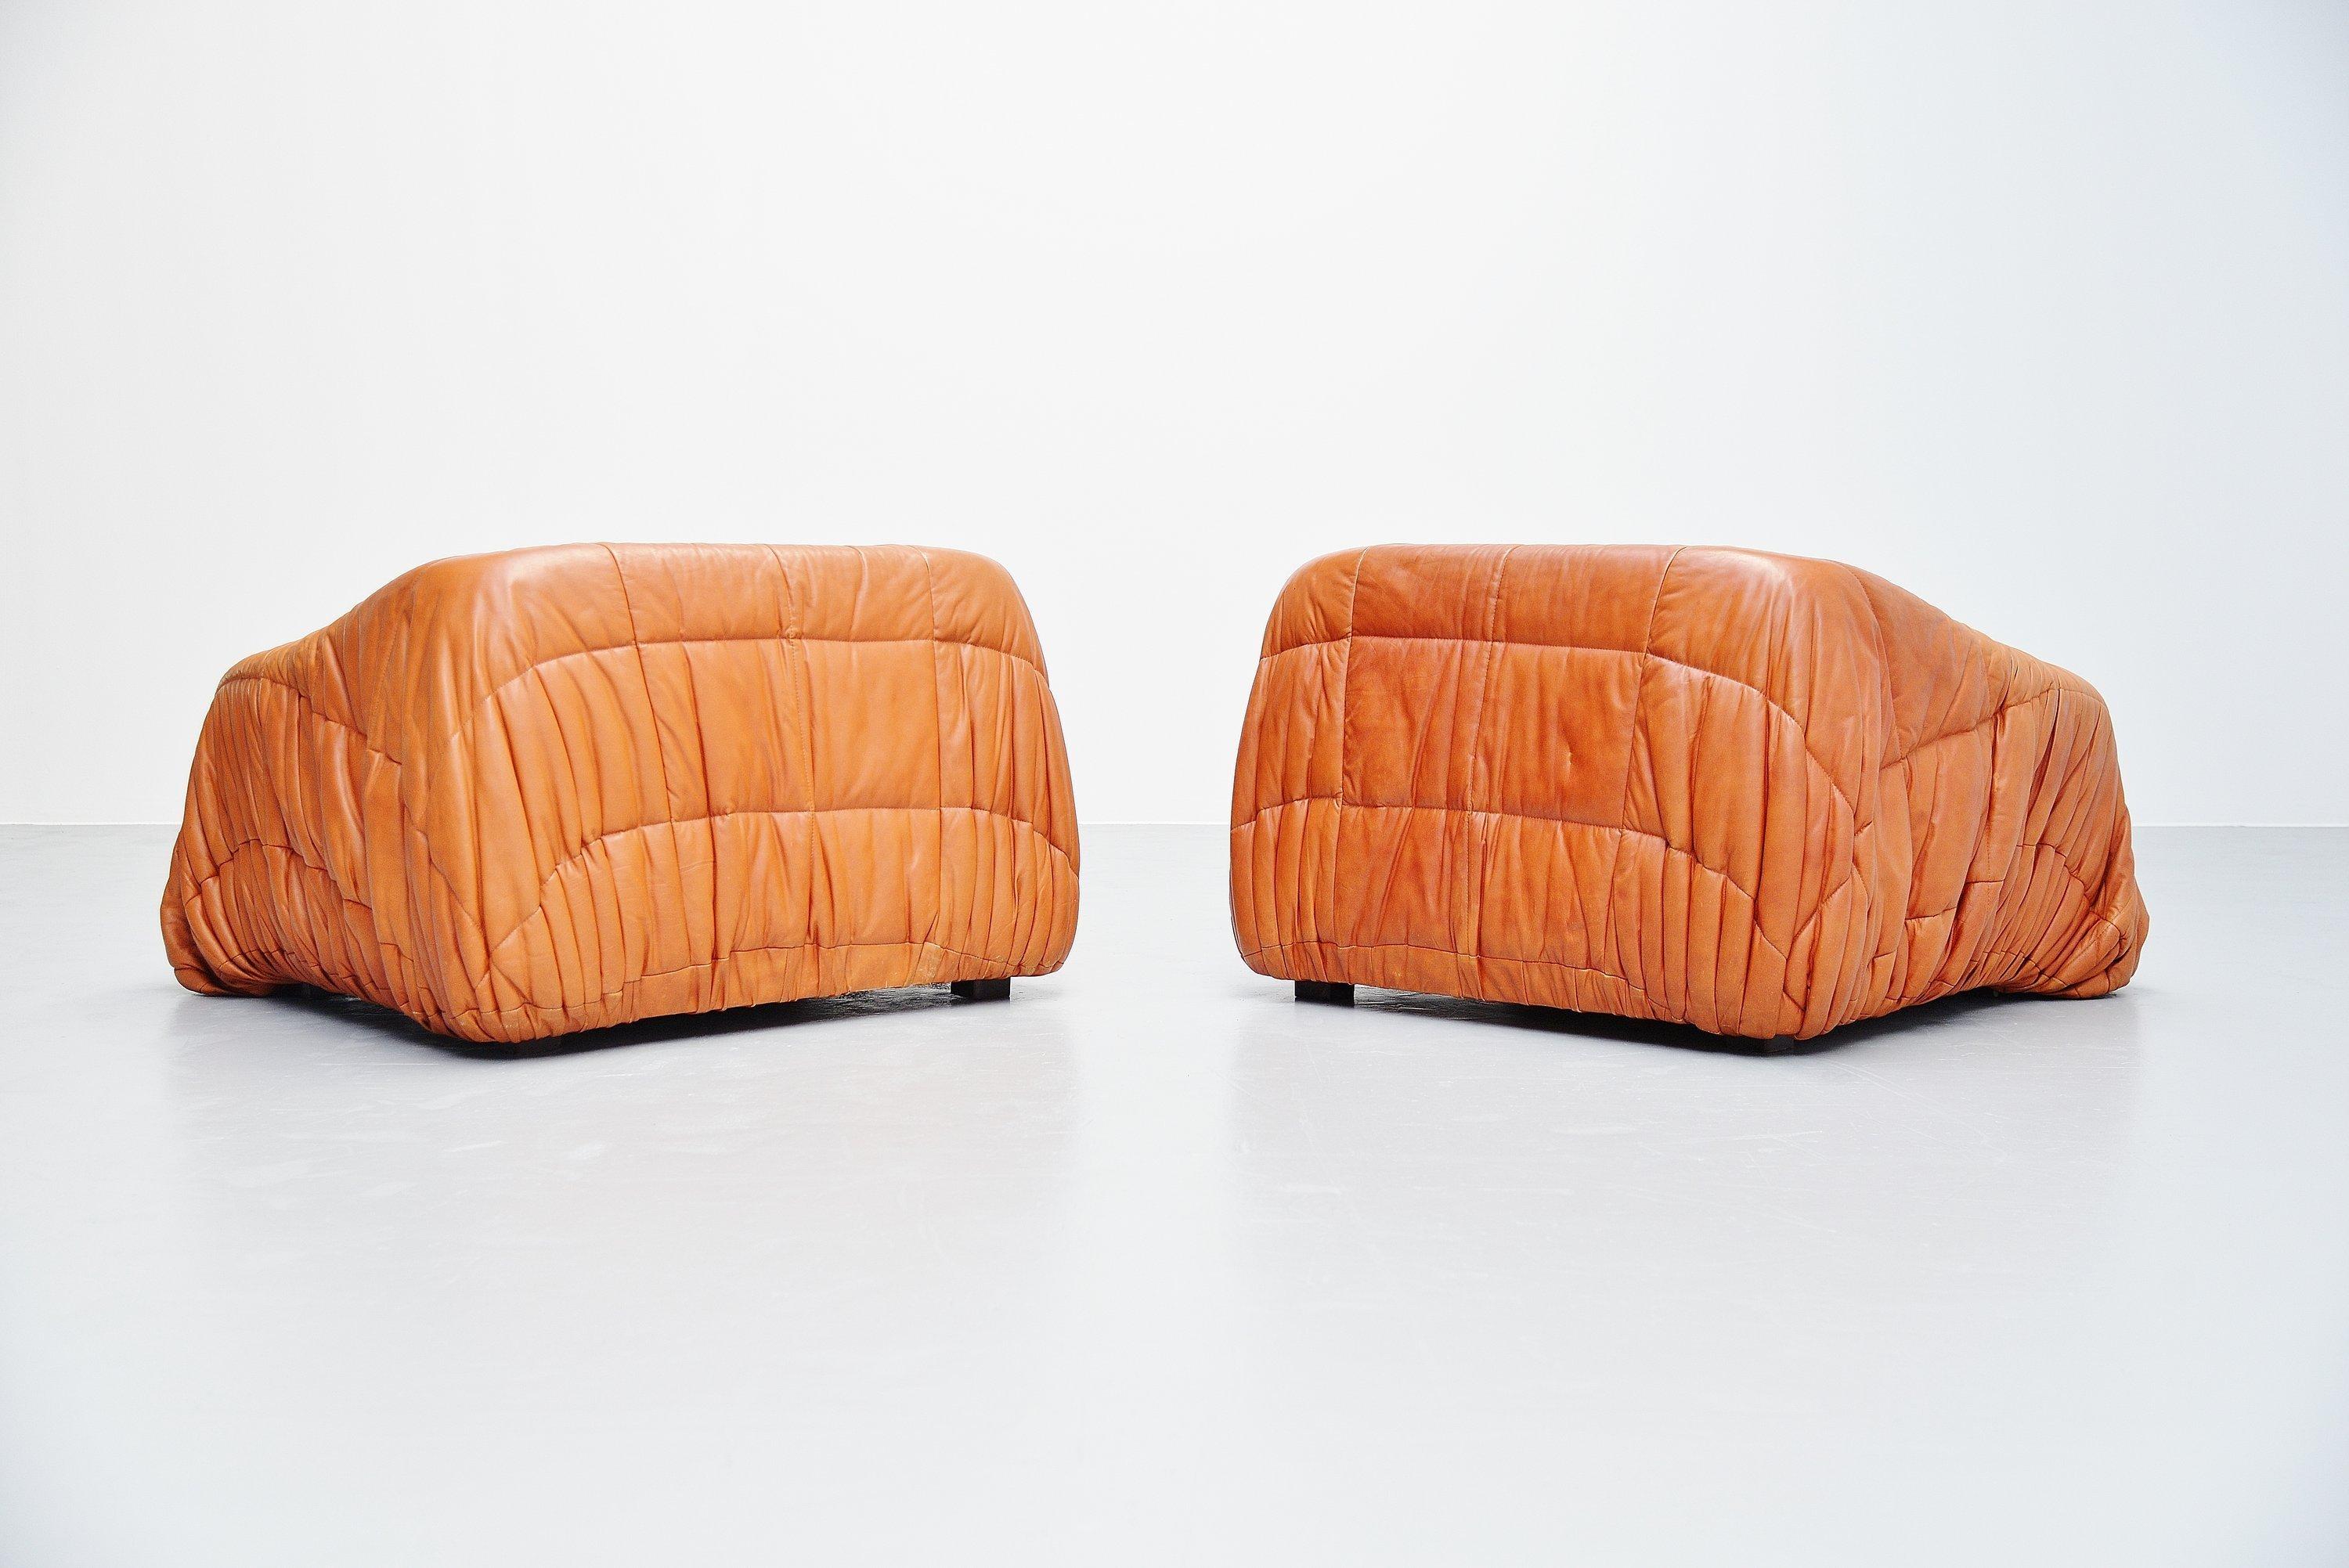 Fantastic pair of Piumino lounge chairs designed by De Pas, D'urbino and Lomazzi and manufactured by Dall'Oca, Italy, 1970. The chairs have a cognac leather upholstery which looks really nice with the wrinkled stitching pattern. The chairs have a